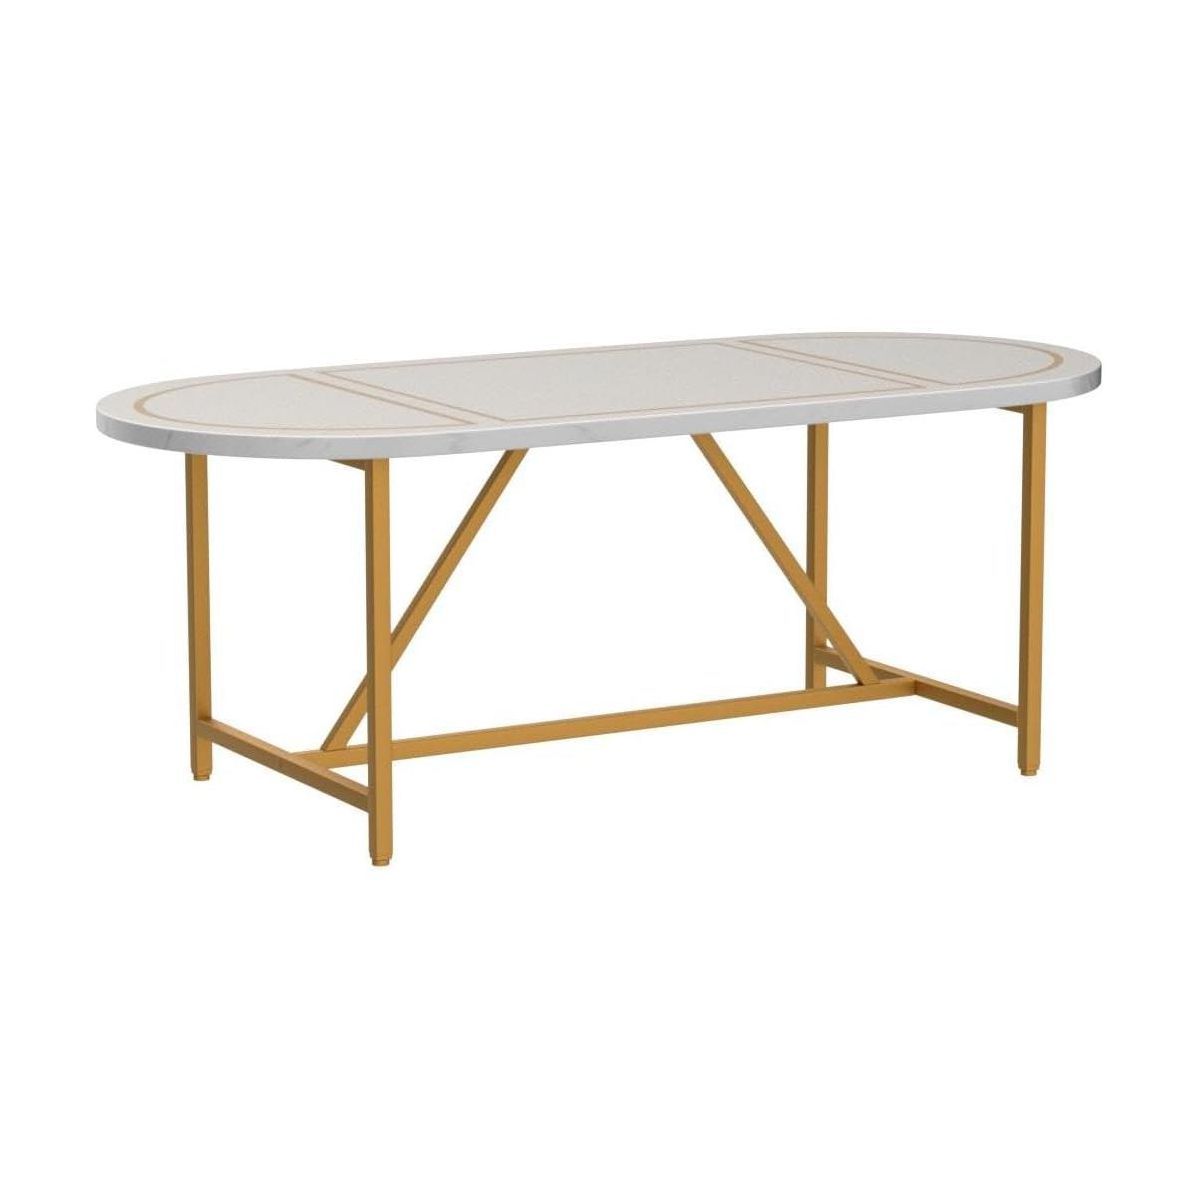 Tribesigns 6FT Dining Table, Oval Shaped Conference Table for Home Office Meeting Room | Target